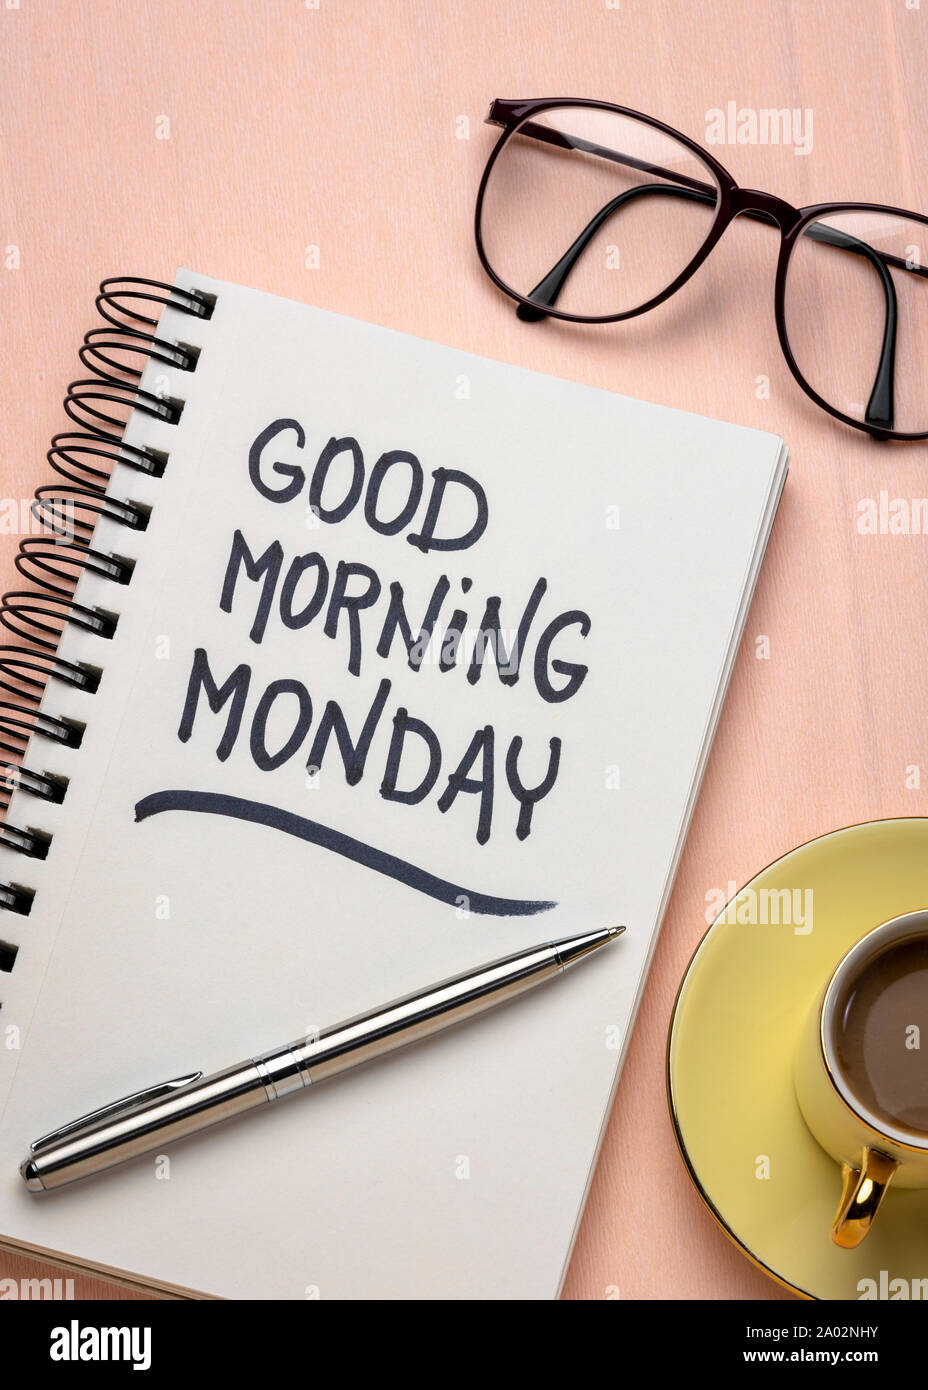 Good Morning Monday - cheerful handwriting with a black marker in ...